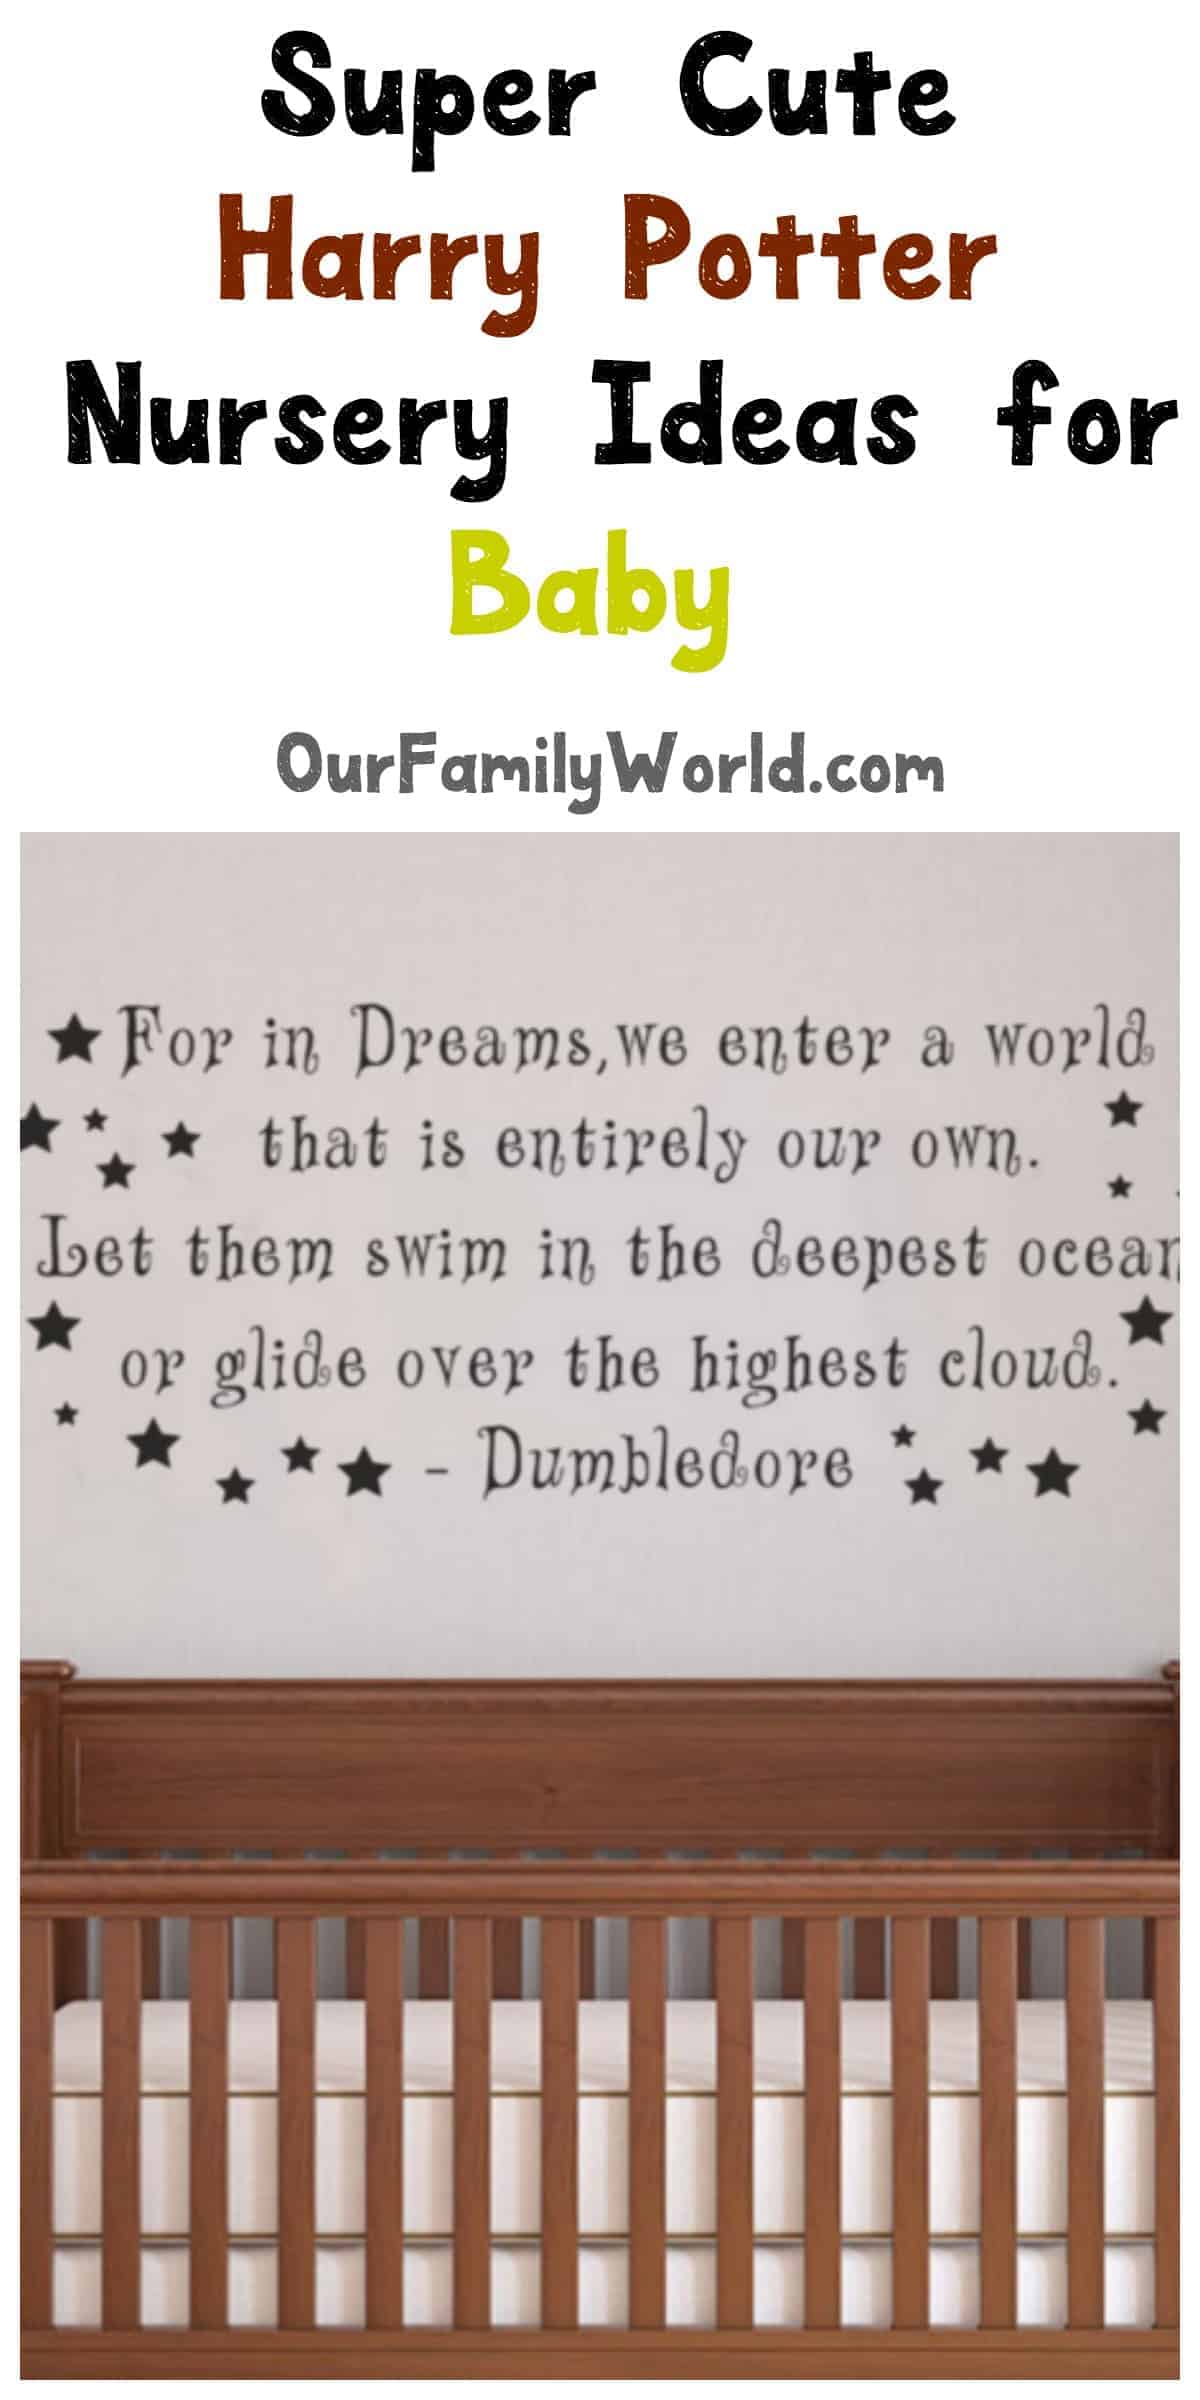 SUPER CUTE HARRY POTTER IDEAS FOR BABY